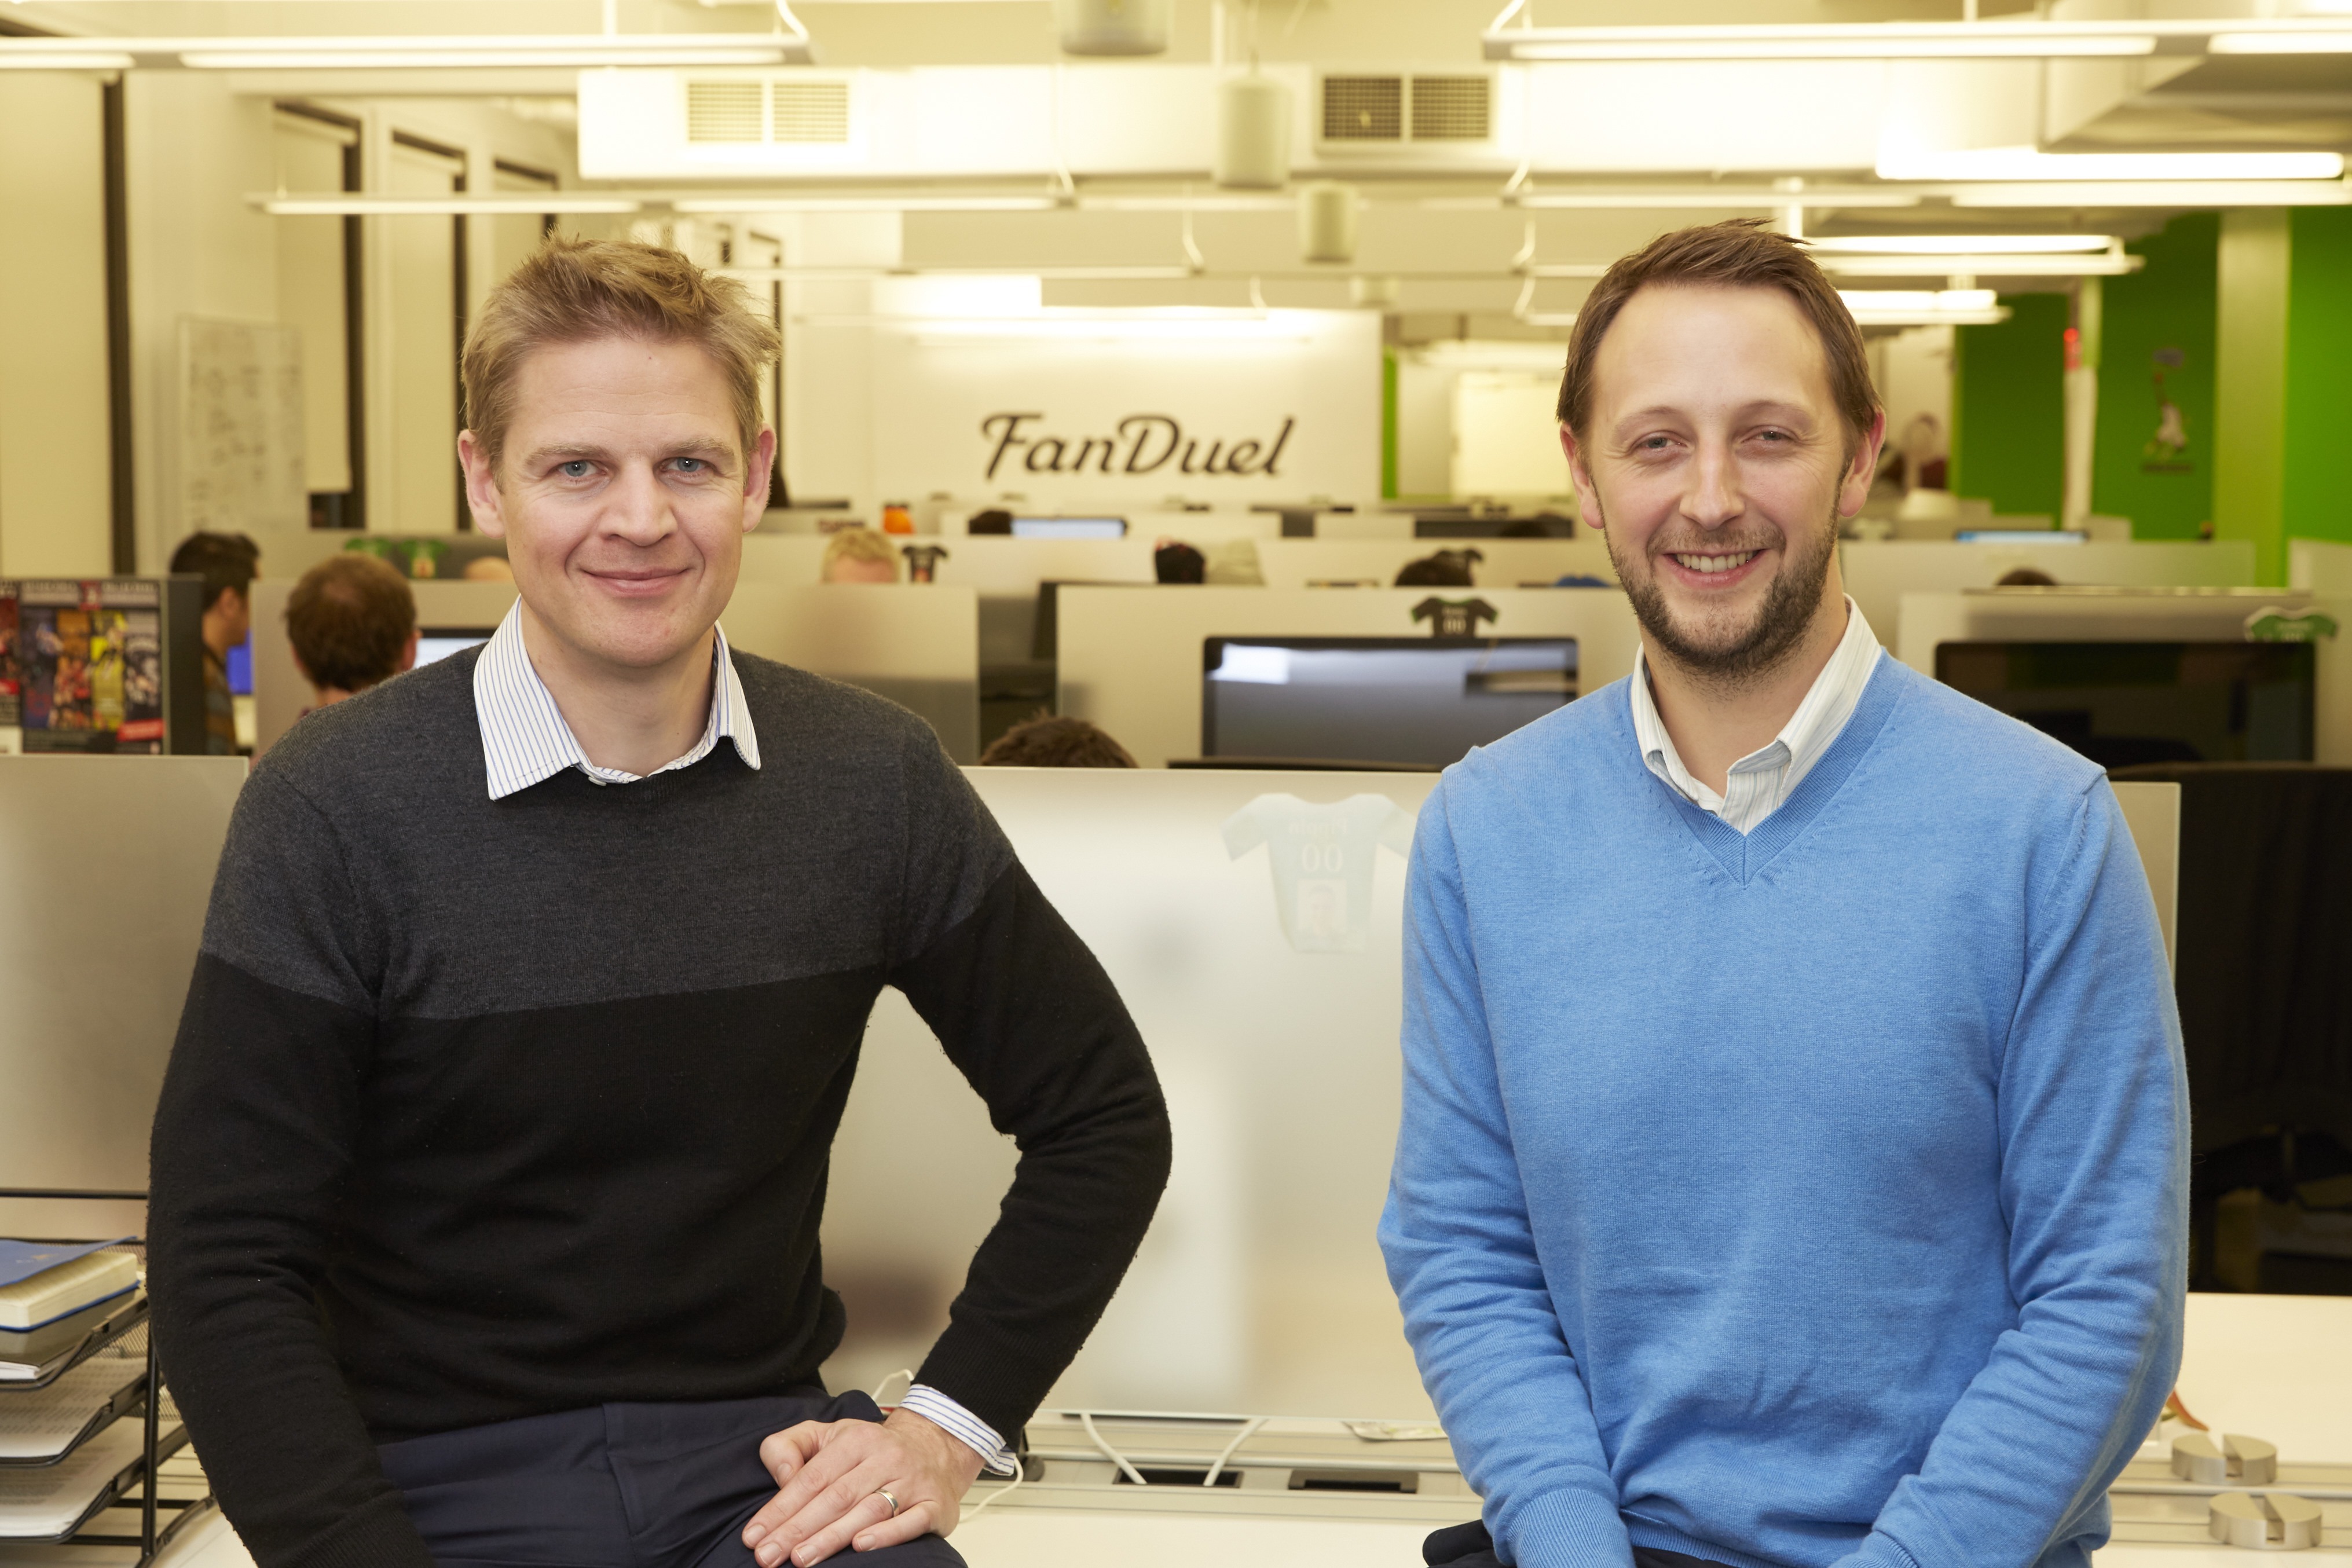 Departed FanDuel founders Nigel Eccles and Tom Griffiths